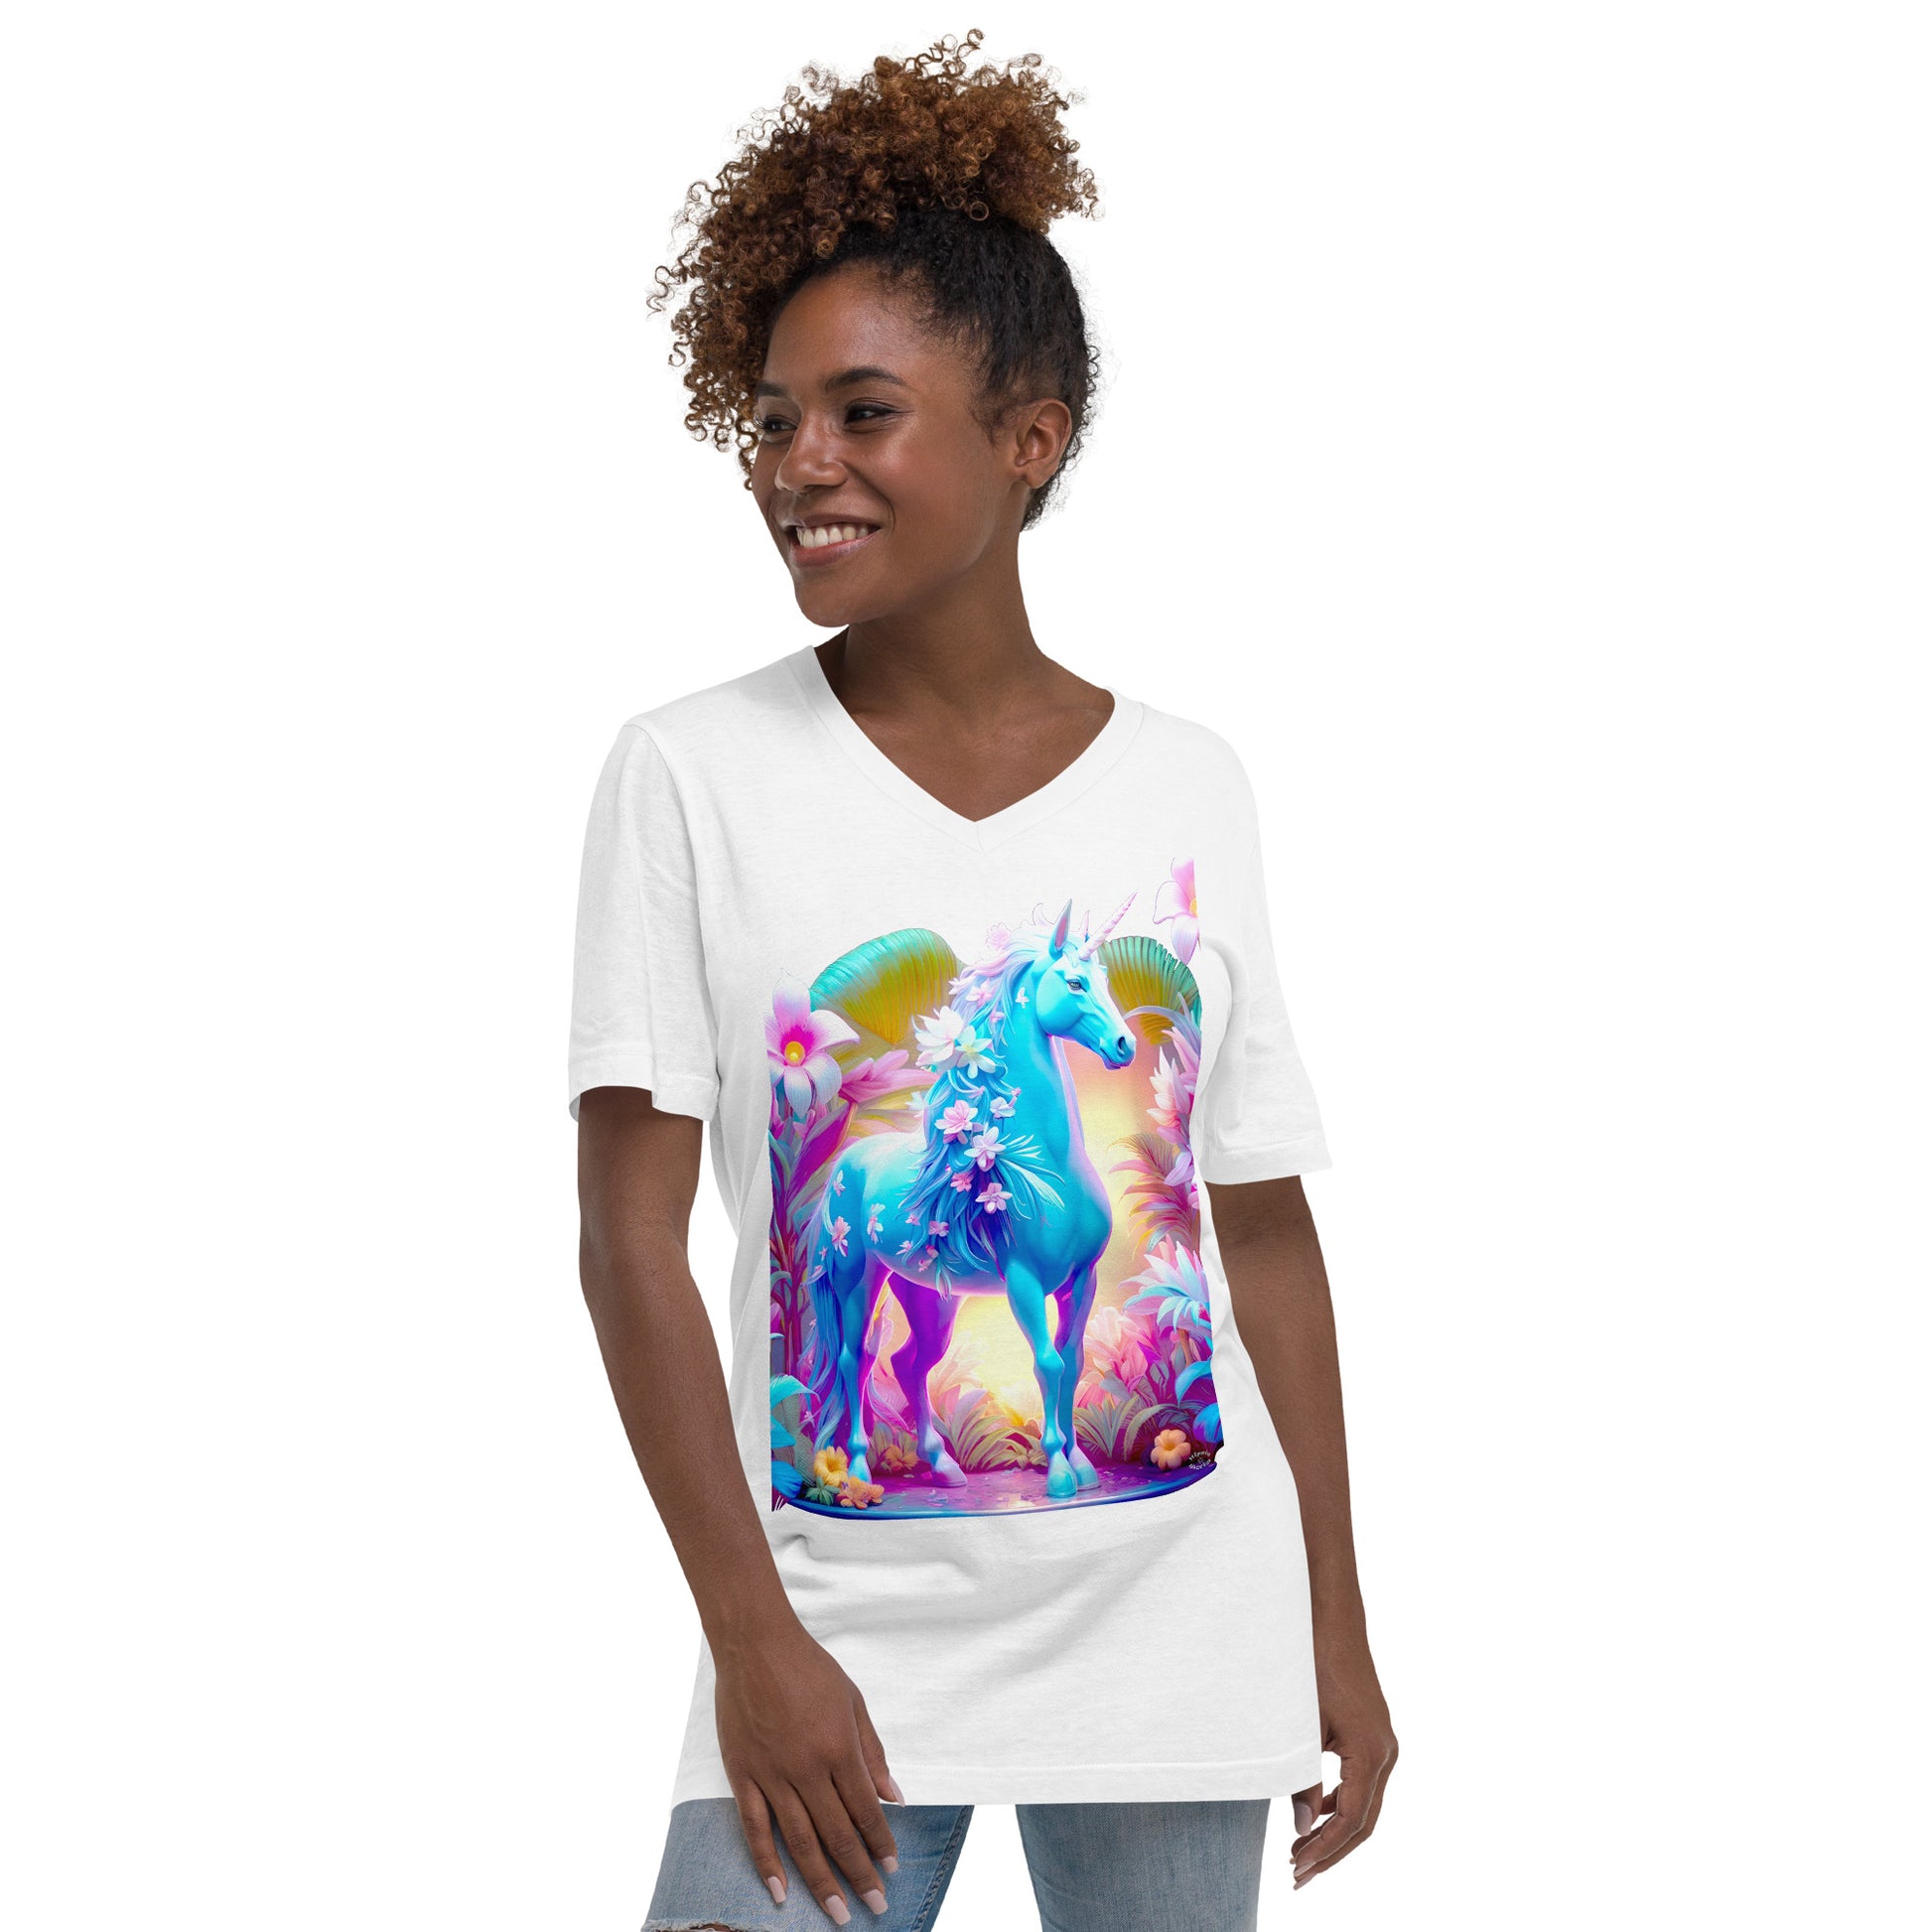 A picture of a woman wearing a tshirt with a brightly colored unicorn surrounded by a colorful garden - Jungle Unicorn Unisex Short Sleeve V-Neck TShirt Media - ft - white